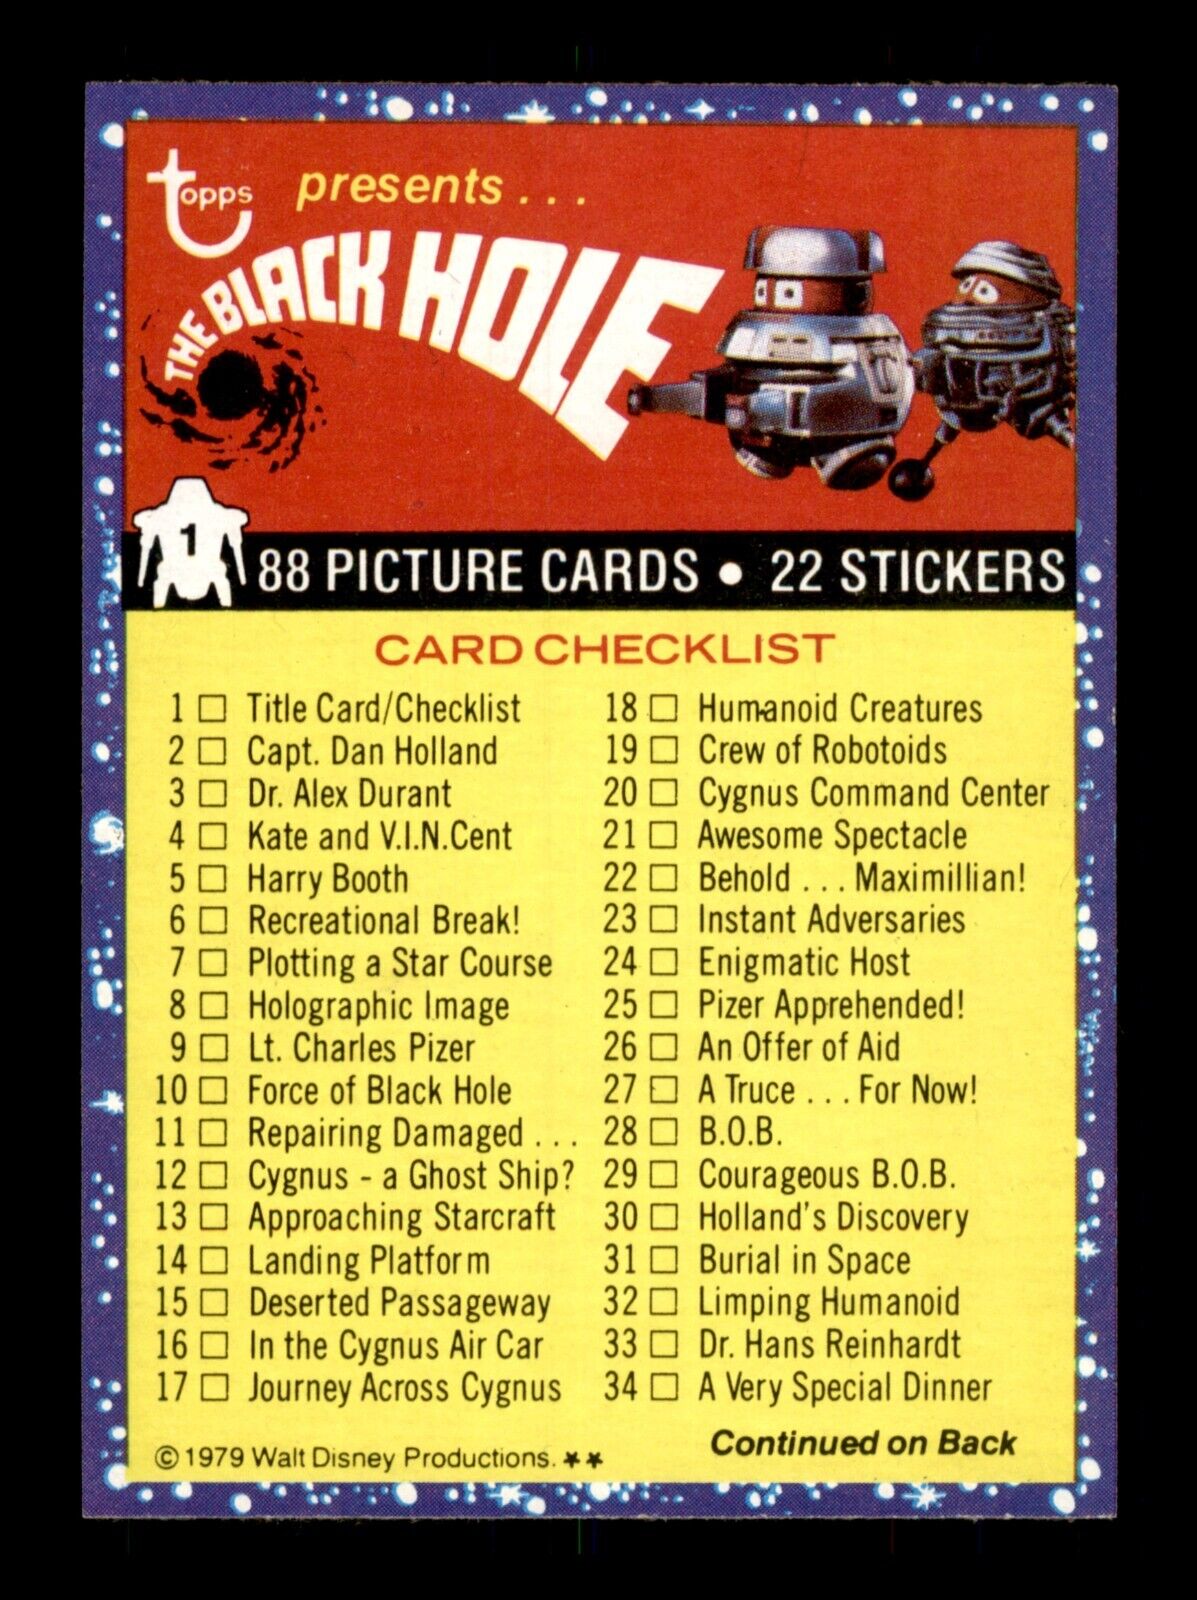 1979 Topps The Black Hole Cards & Stickers / SEE DROP DOWN MENU 4 CARD U RECEIVE